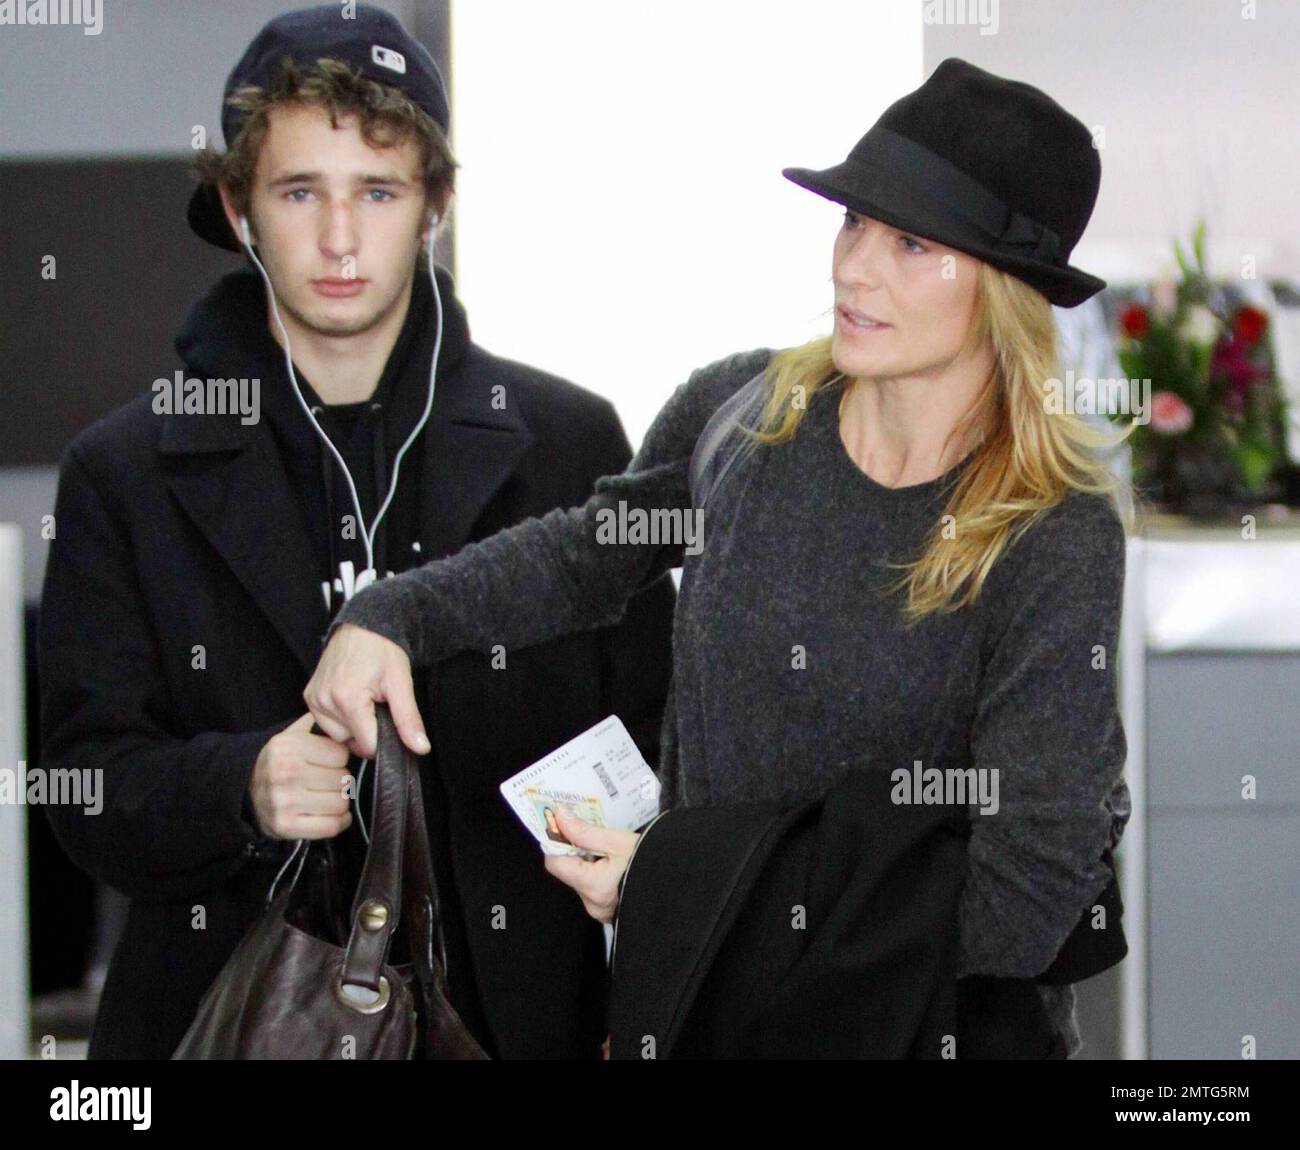 EXCLUSIVE!! Six months after her divorce from Oscar winning actor Sean Penn, actress Robin Wright, 44, makes her way through LAX with her son Hopper Penn, 18.  Despite not wearing makeup Wright's skin looked fresh and wrinkle free.  According to reports Robin received half of her ex's earnings in their divorce settlement, the news came after Sean reportedly mentioned that he 'had just got taken for one half of everything I had in the divorce' when speaking about his social work in Haiti. Los Angeles, CA. 01/08/11. Stock Photo